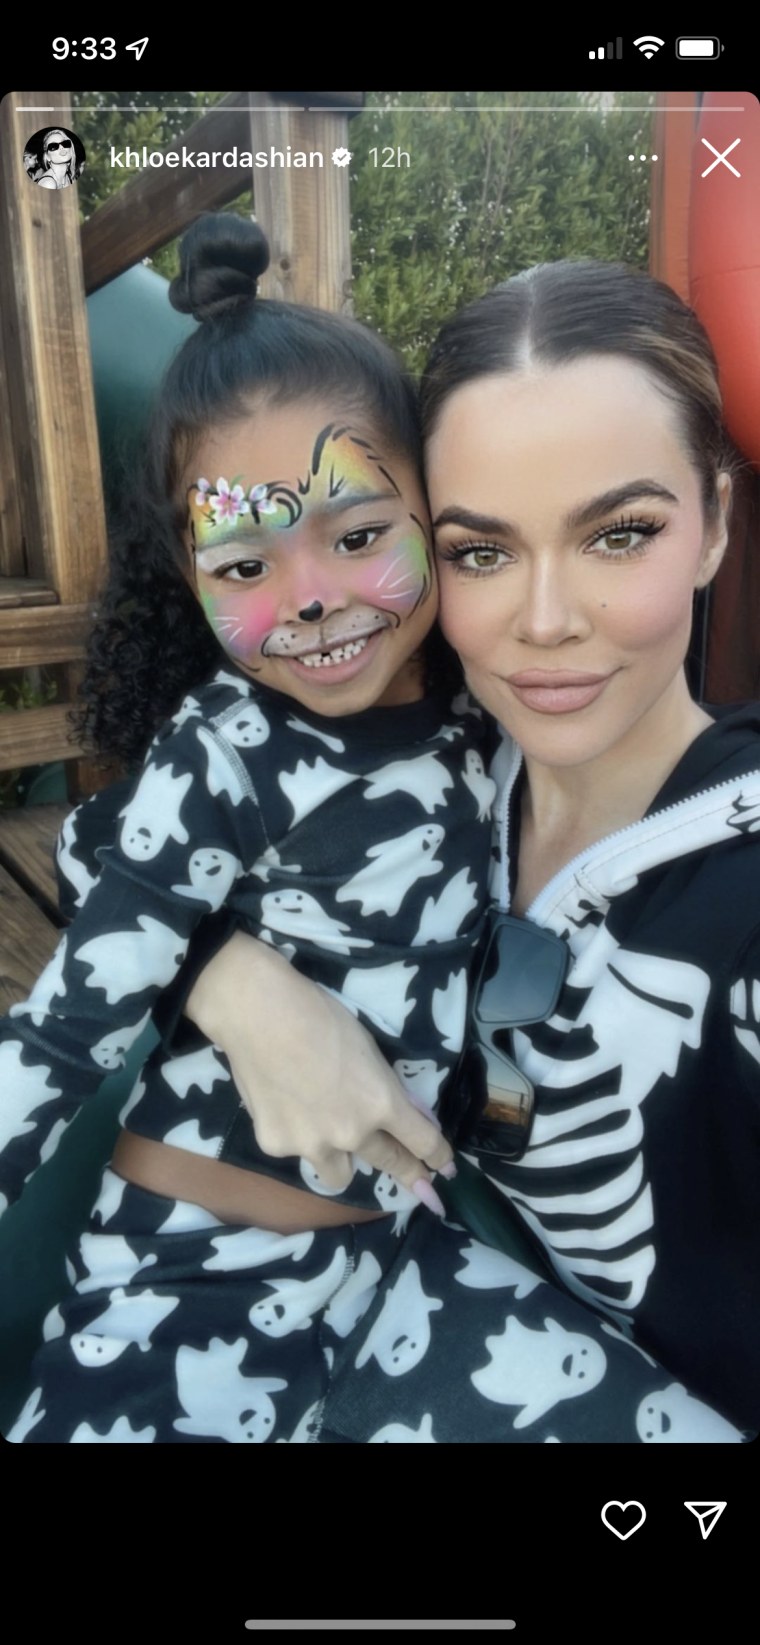 Khloe Kardashian and her daughter True Thompson in their Halloween-themed onesies.